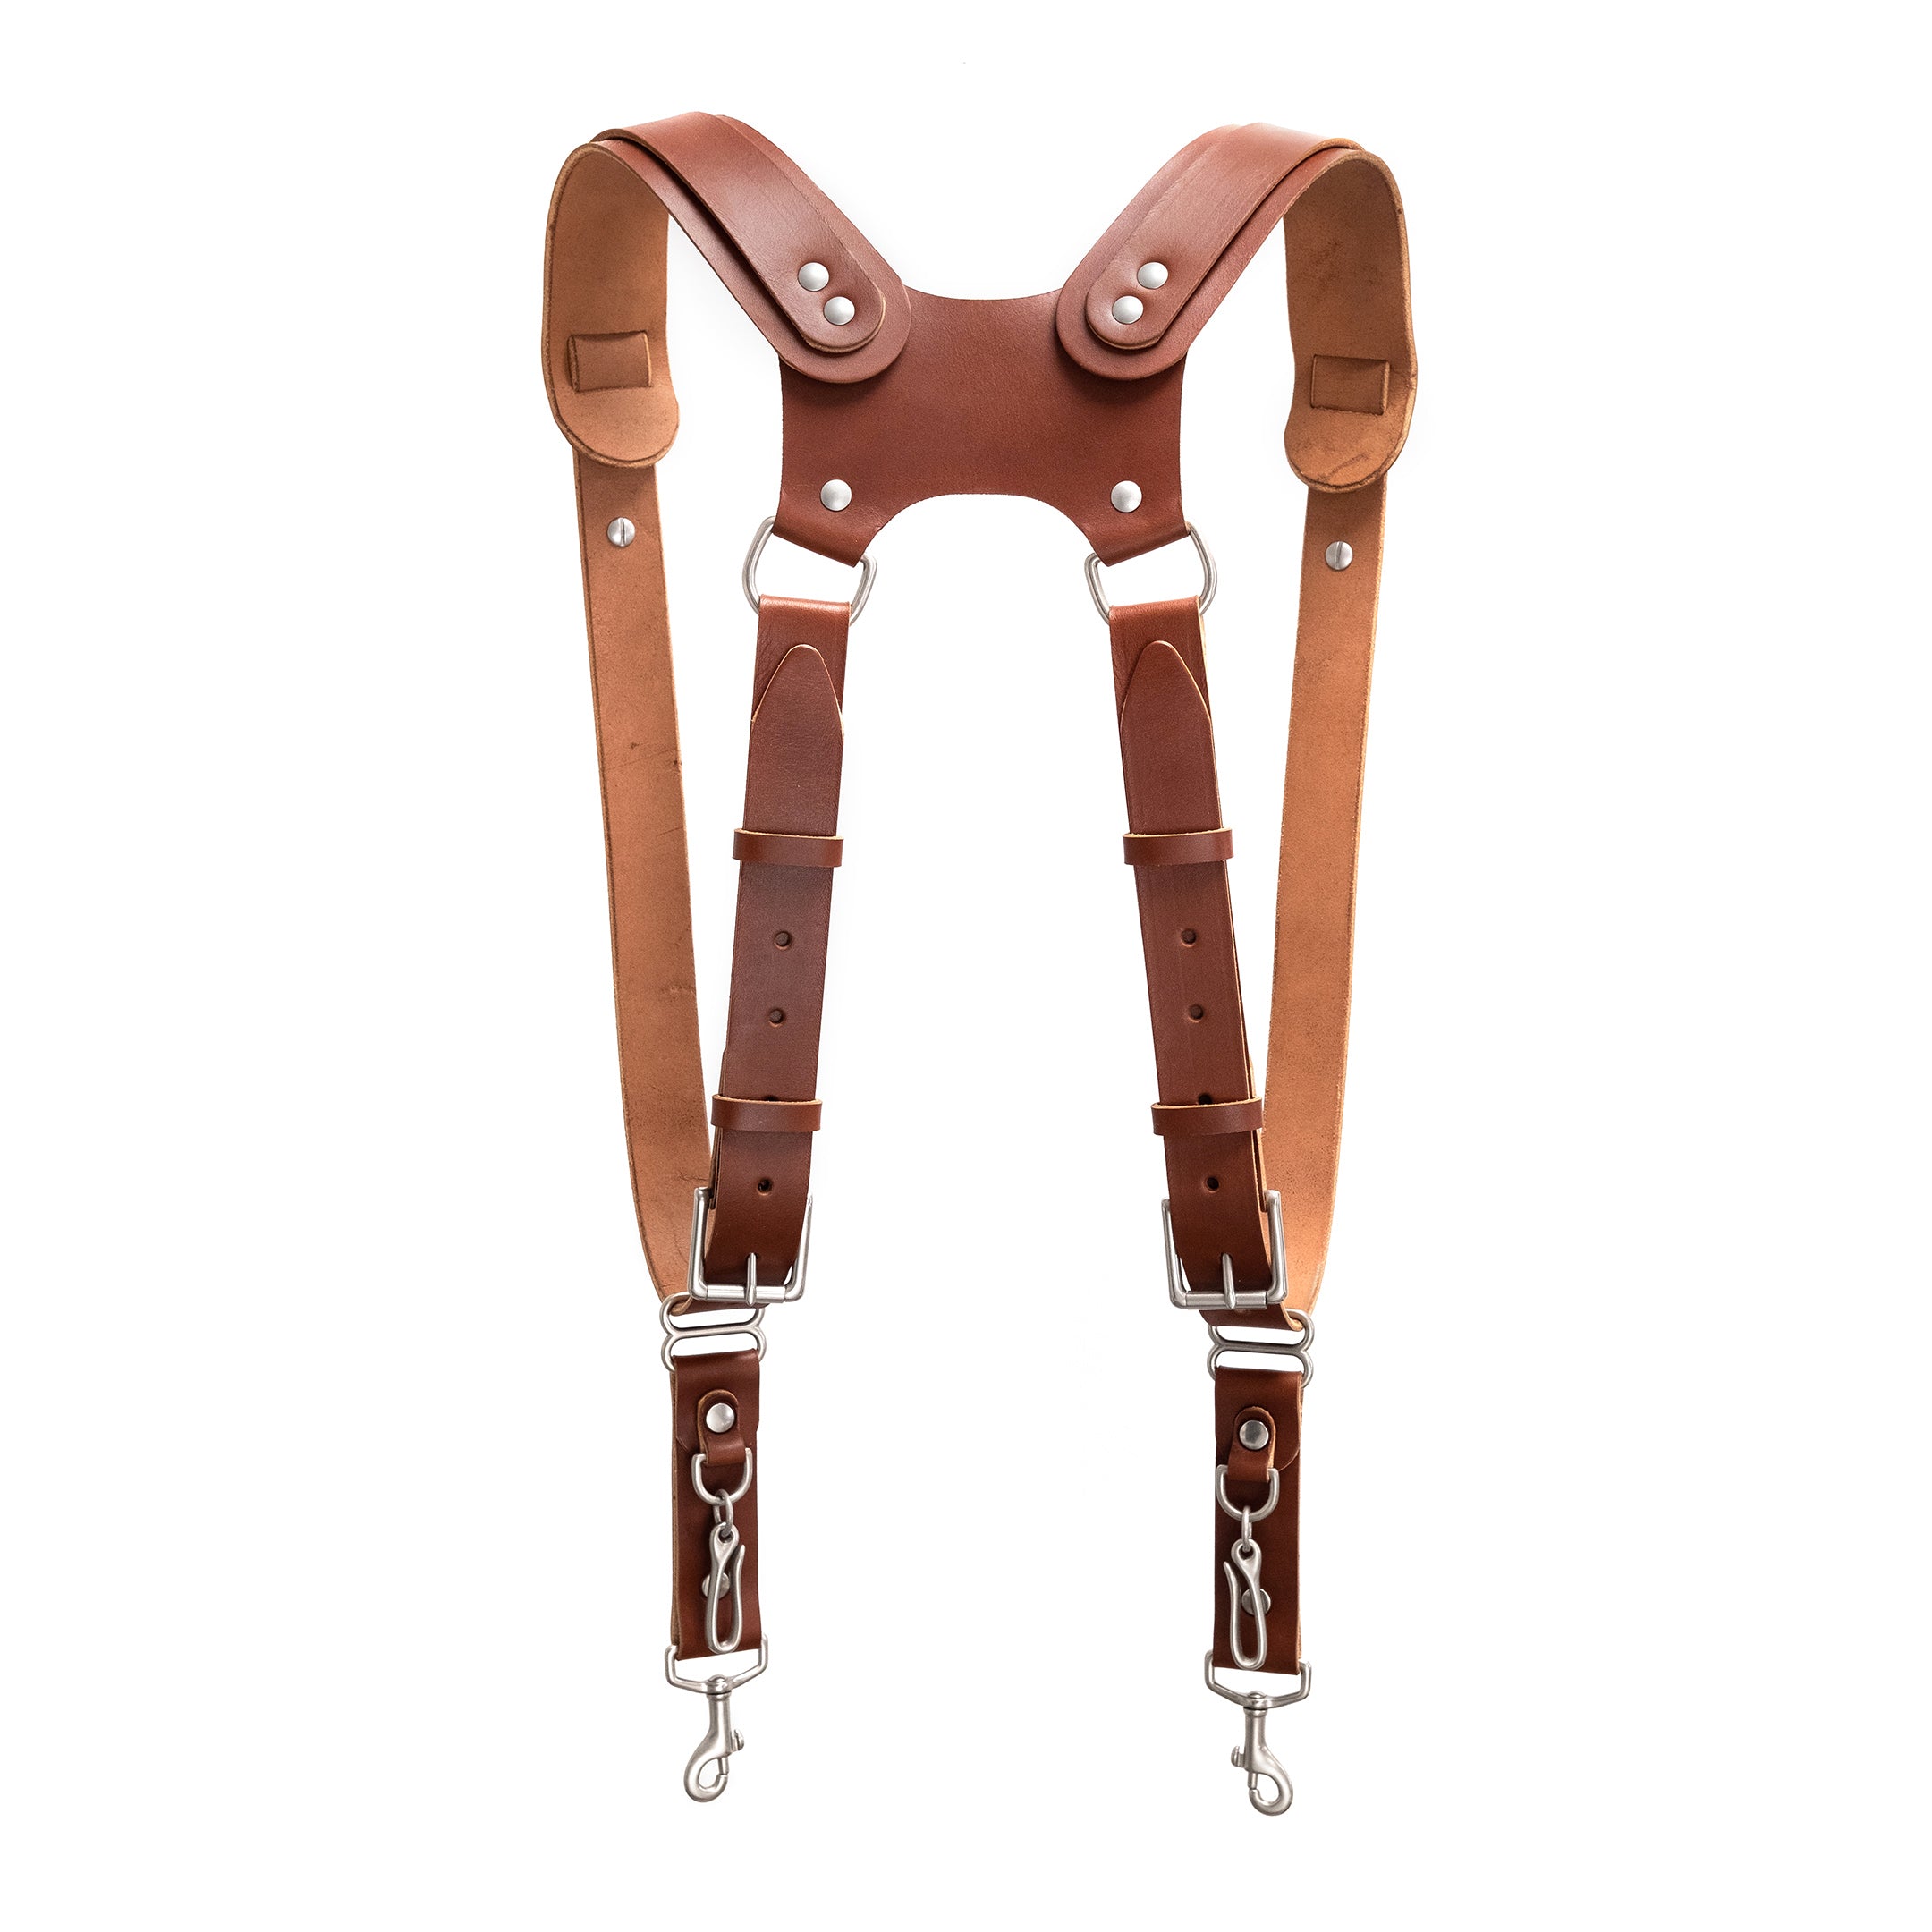 Fab' F22 harness - Brown leather - Size XL